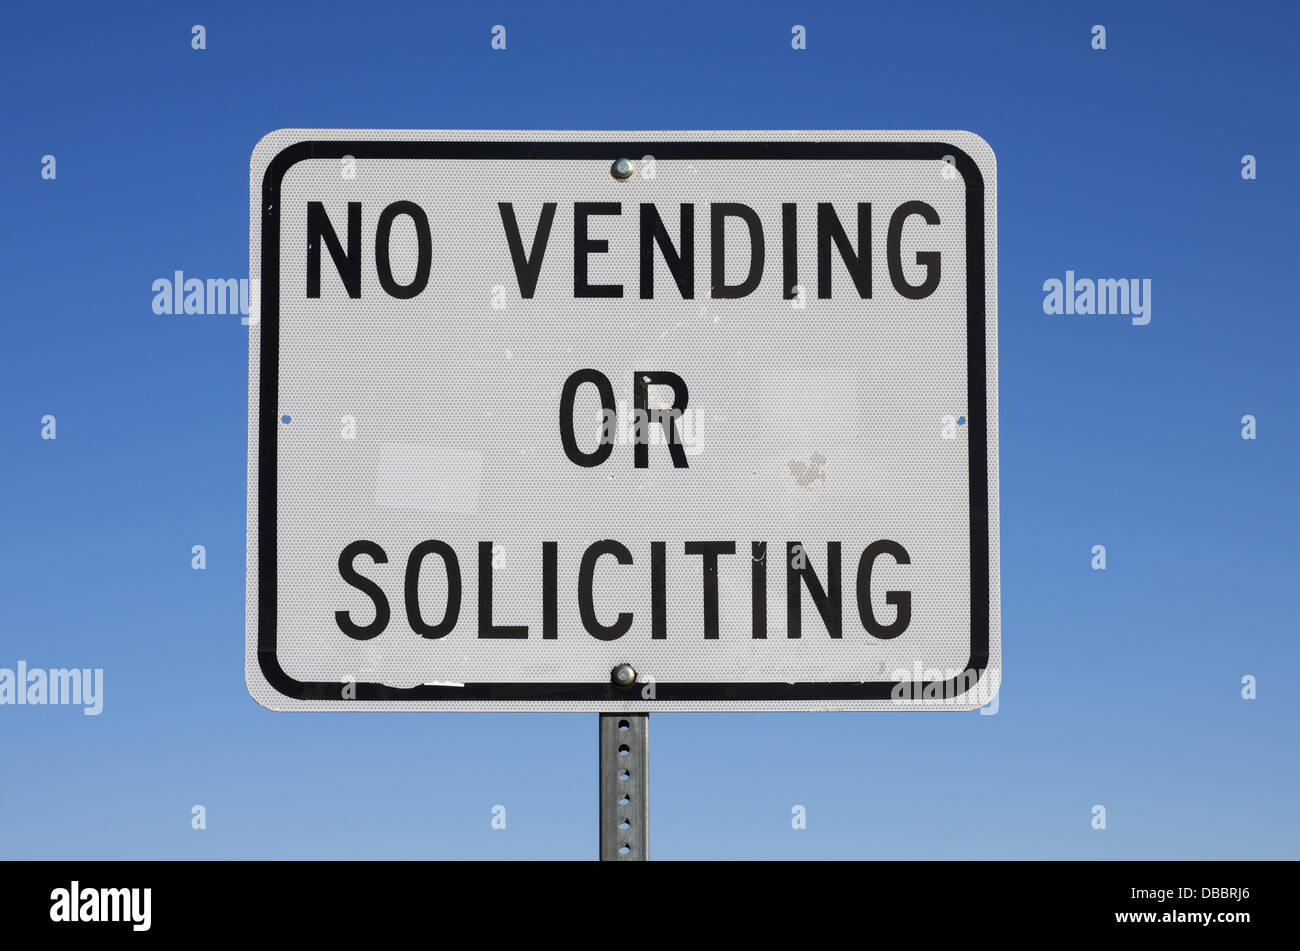 no vending or soliciting sign with blue sky background Stock Photo